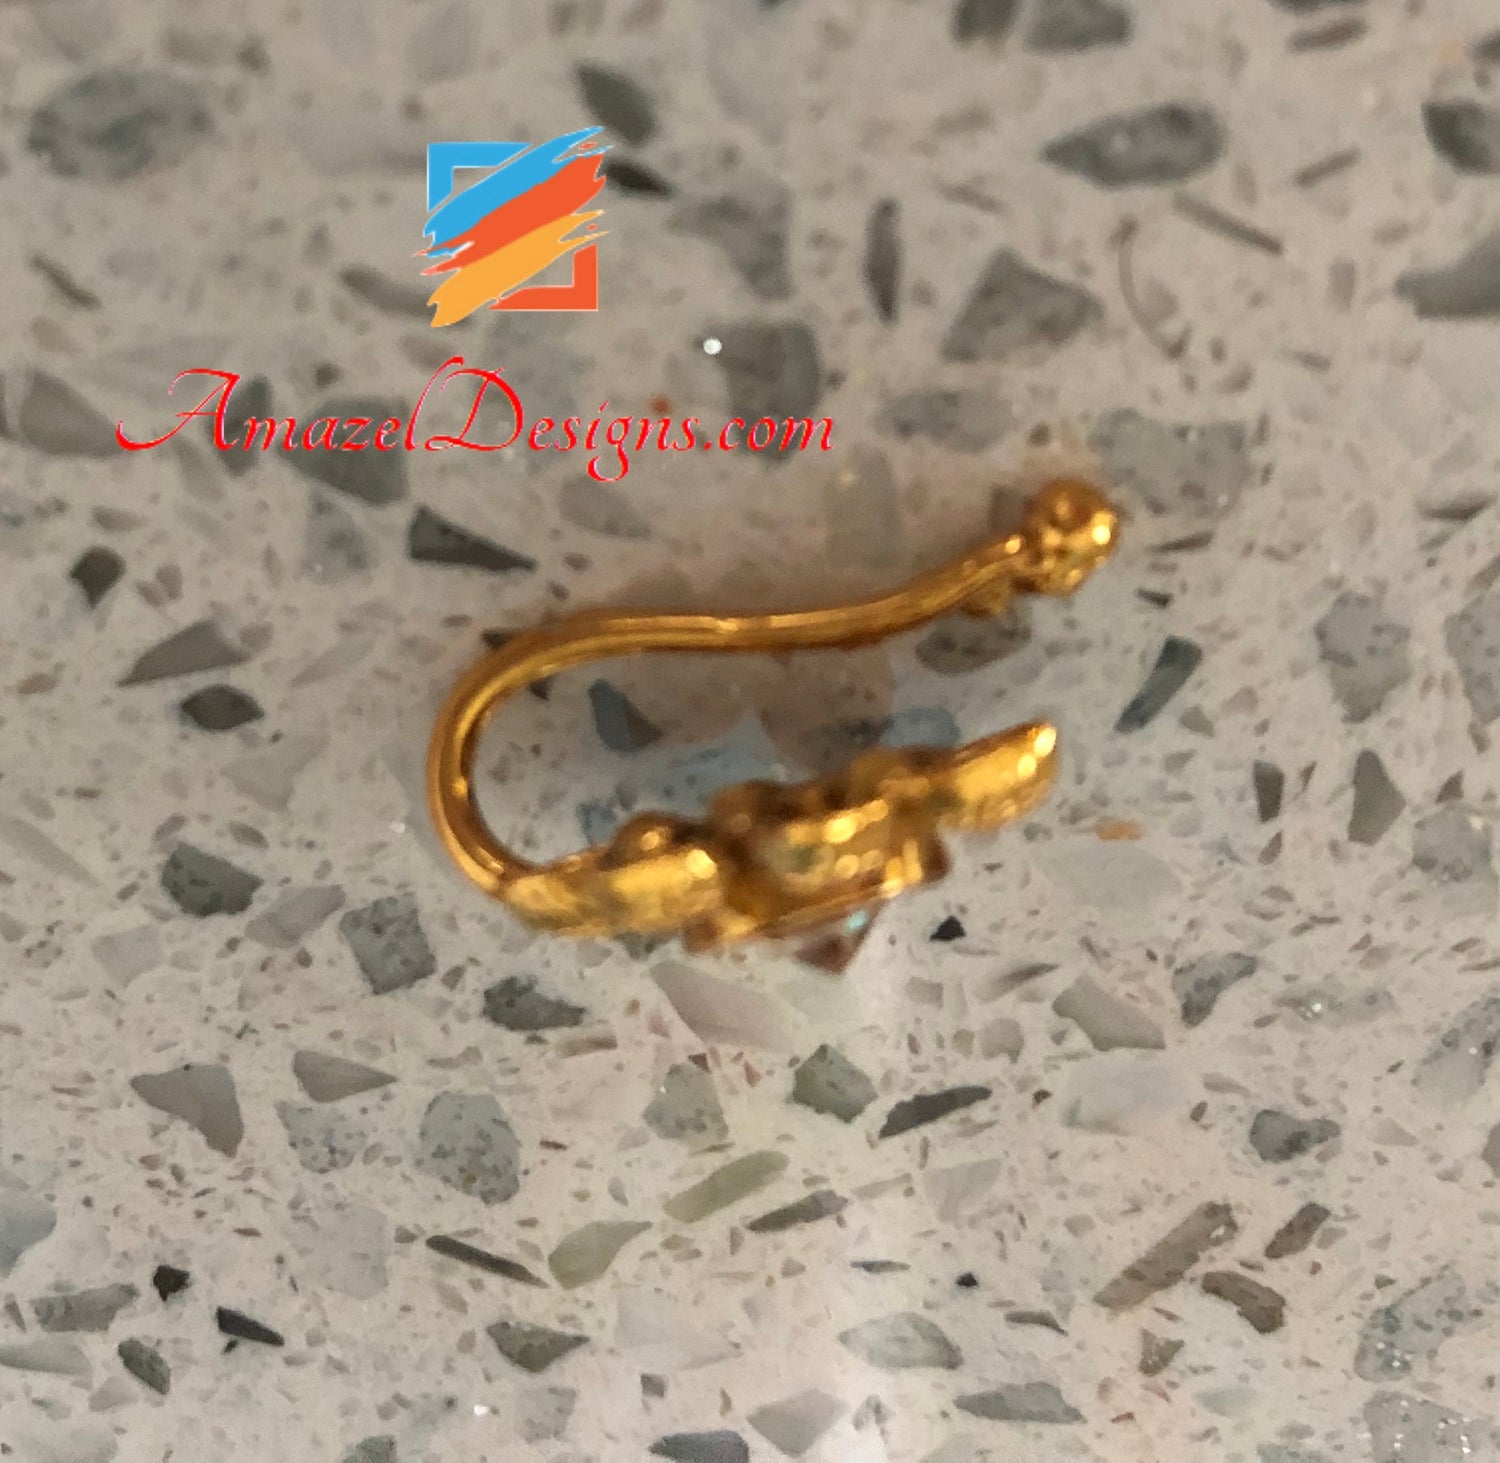 Buy Indian Nose Stud, Gold Nose Stud, Unique Nose Stud, Nose Screw Gold, Indian  Jewelry, 14k Gold Nose Stud, Tragus Jewelry Gold, 18g, 20g, 24g Online in  India - Etsy